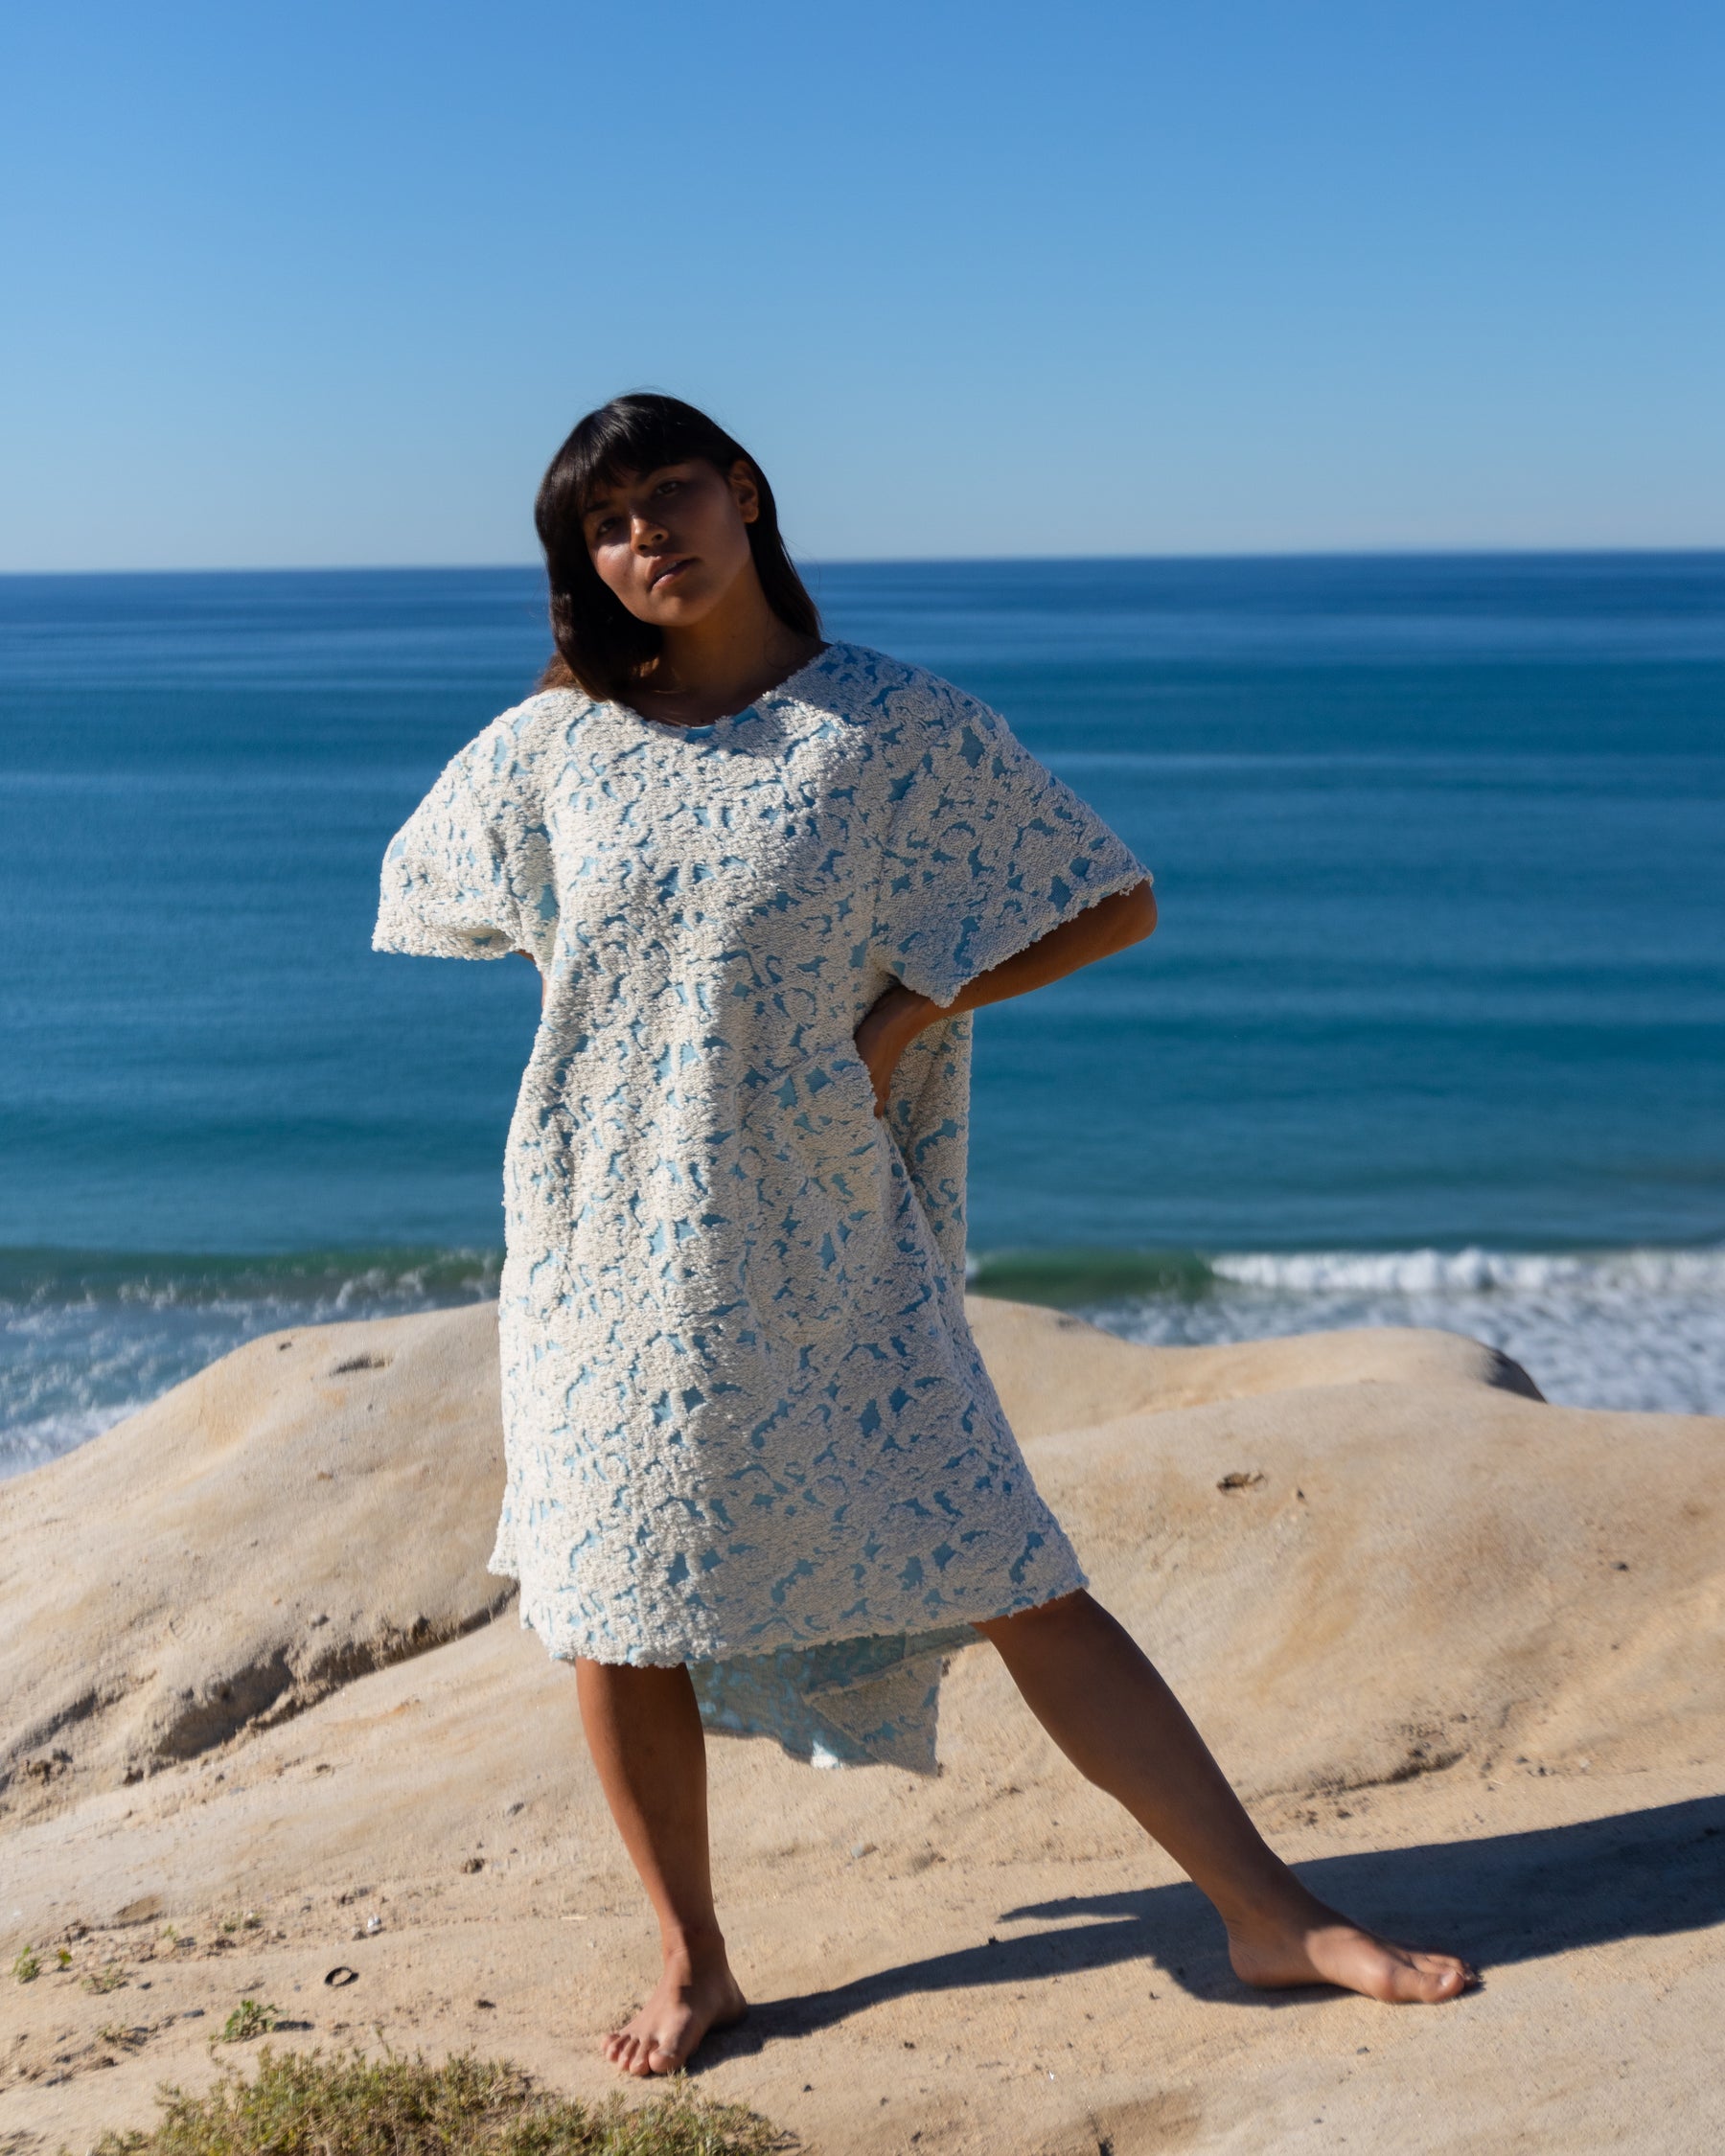 Brynne Nimbus White Blue Textured Changing Cape Towel Dress Poncho